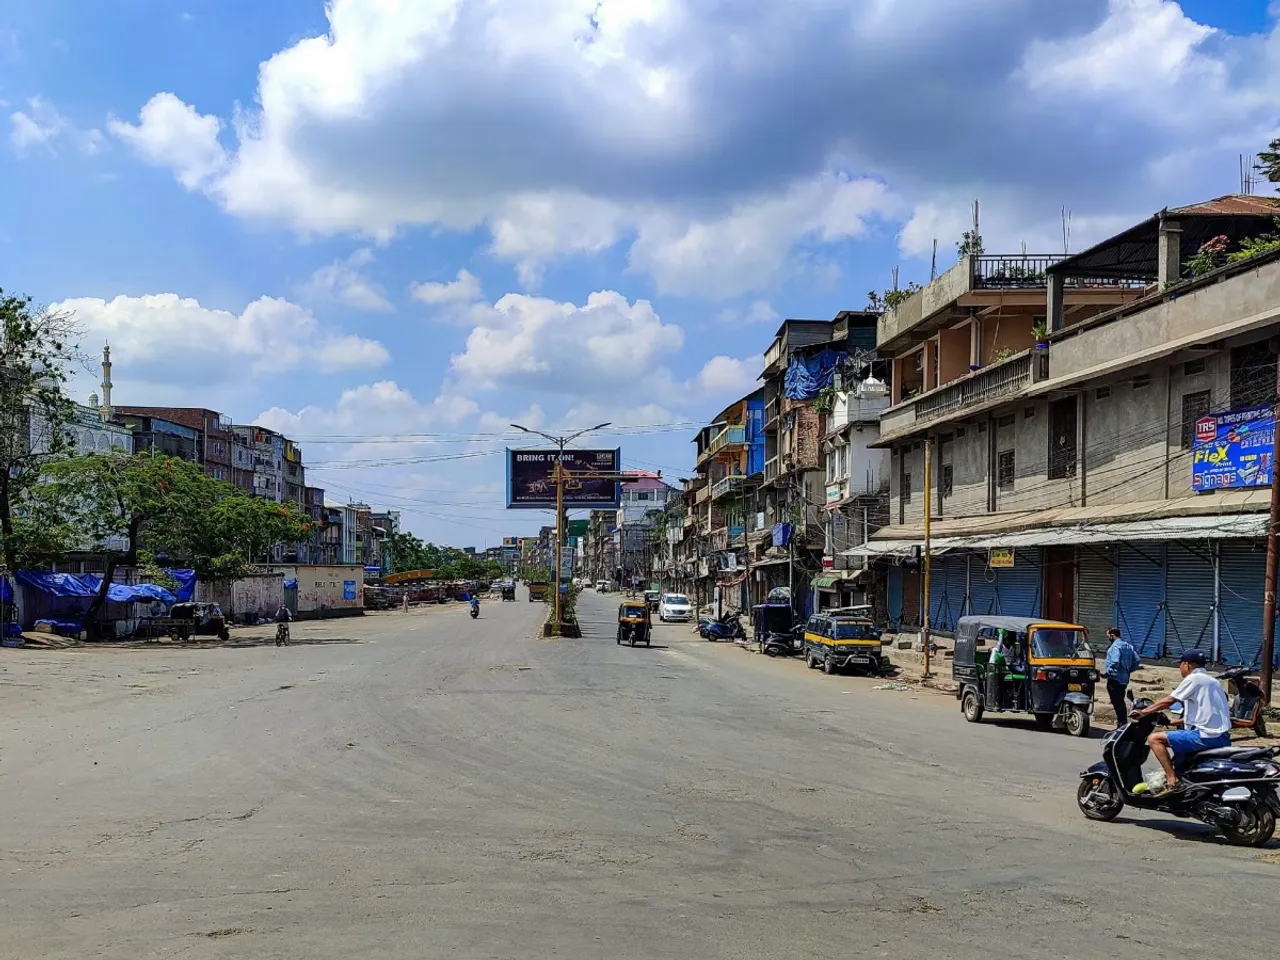 Full curfew reimposed in 5 valley districts of Manipur as preventive measure